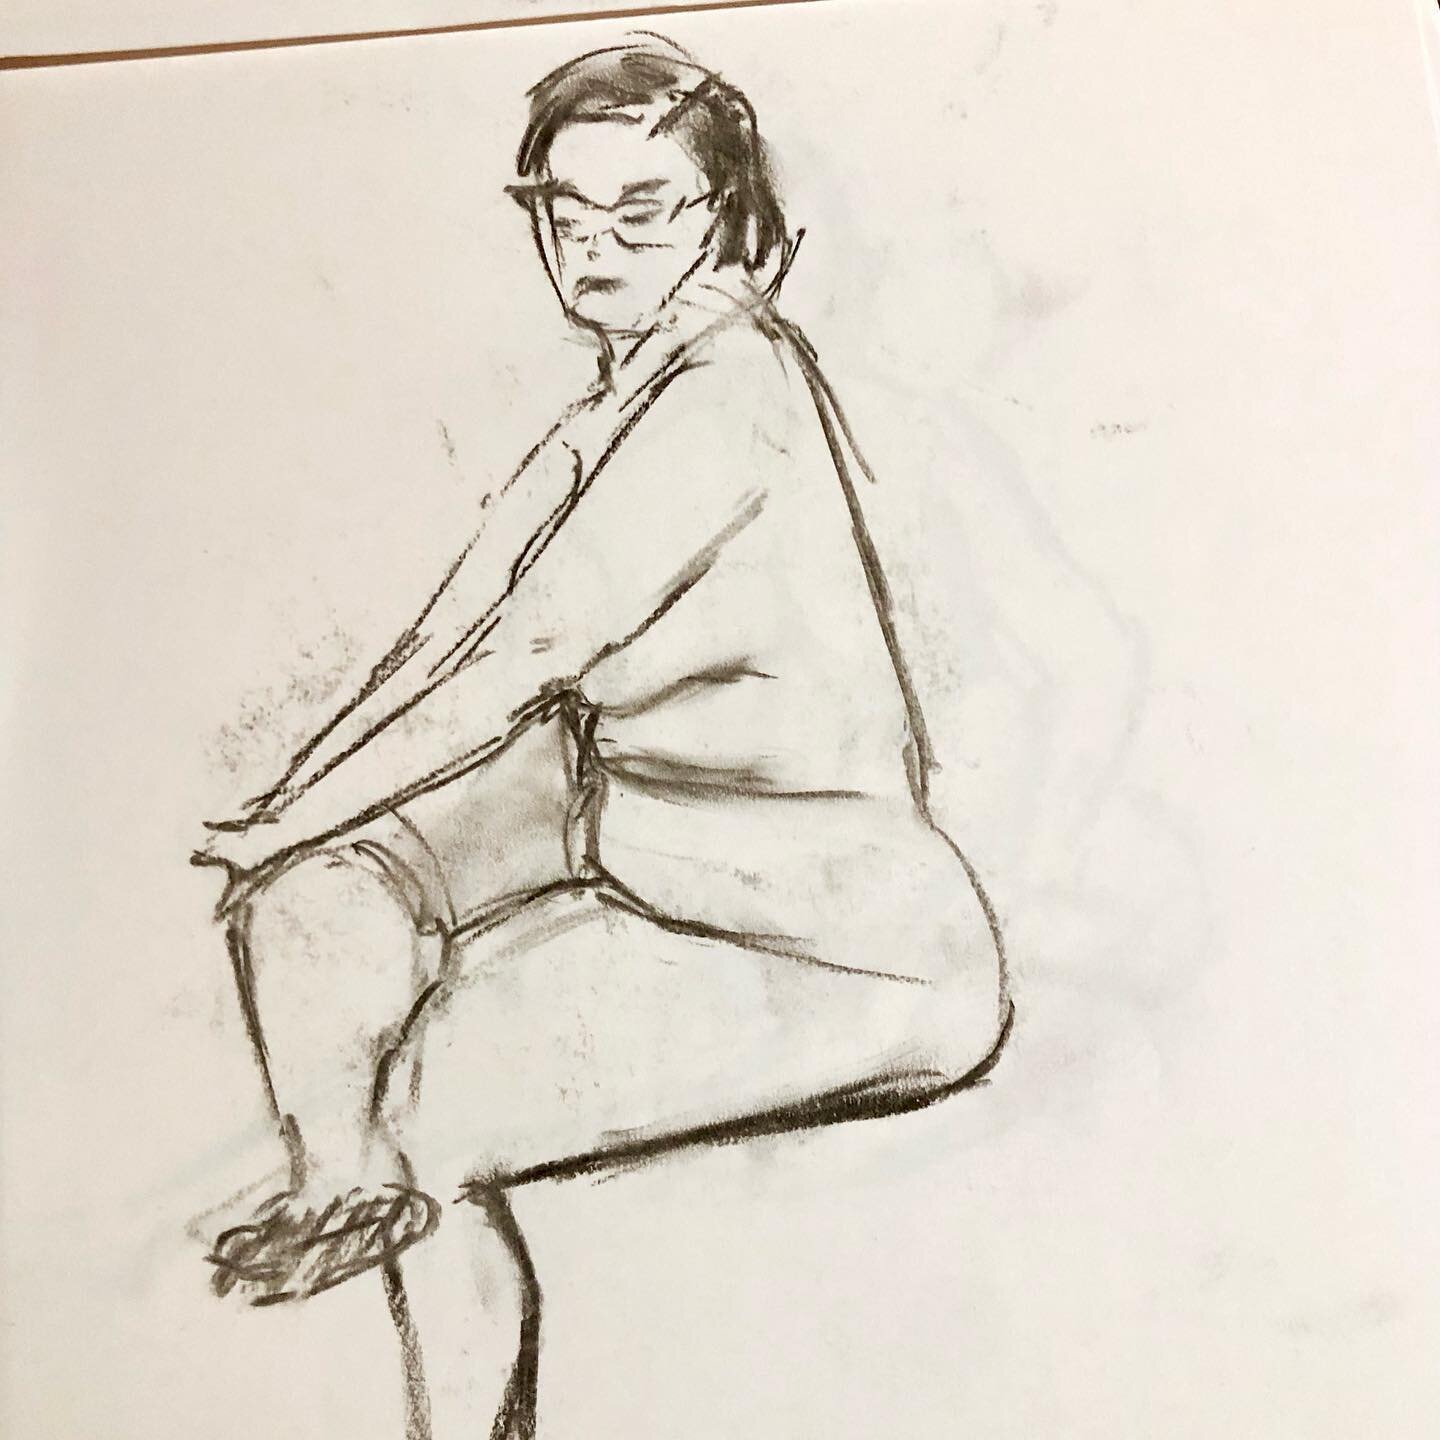 11th May. Life Drawing Event
The group held its first live drawing event for some years. We are so grateful to @alice_afterafashion our model. The session was very well attended and we saw some stunning (and speedy) work.  With some poses only lastin